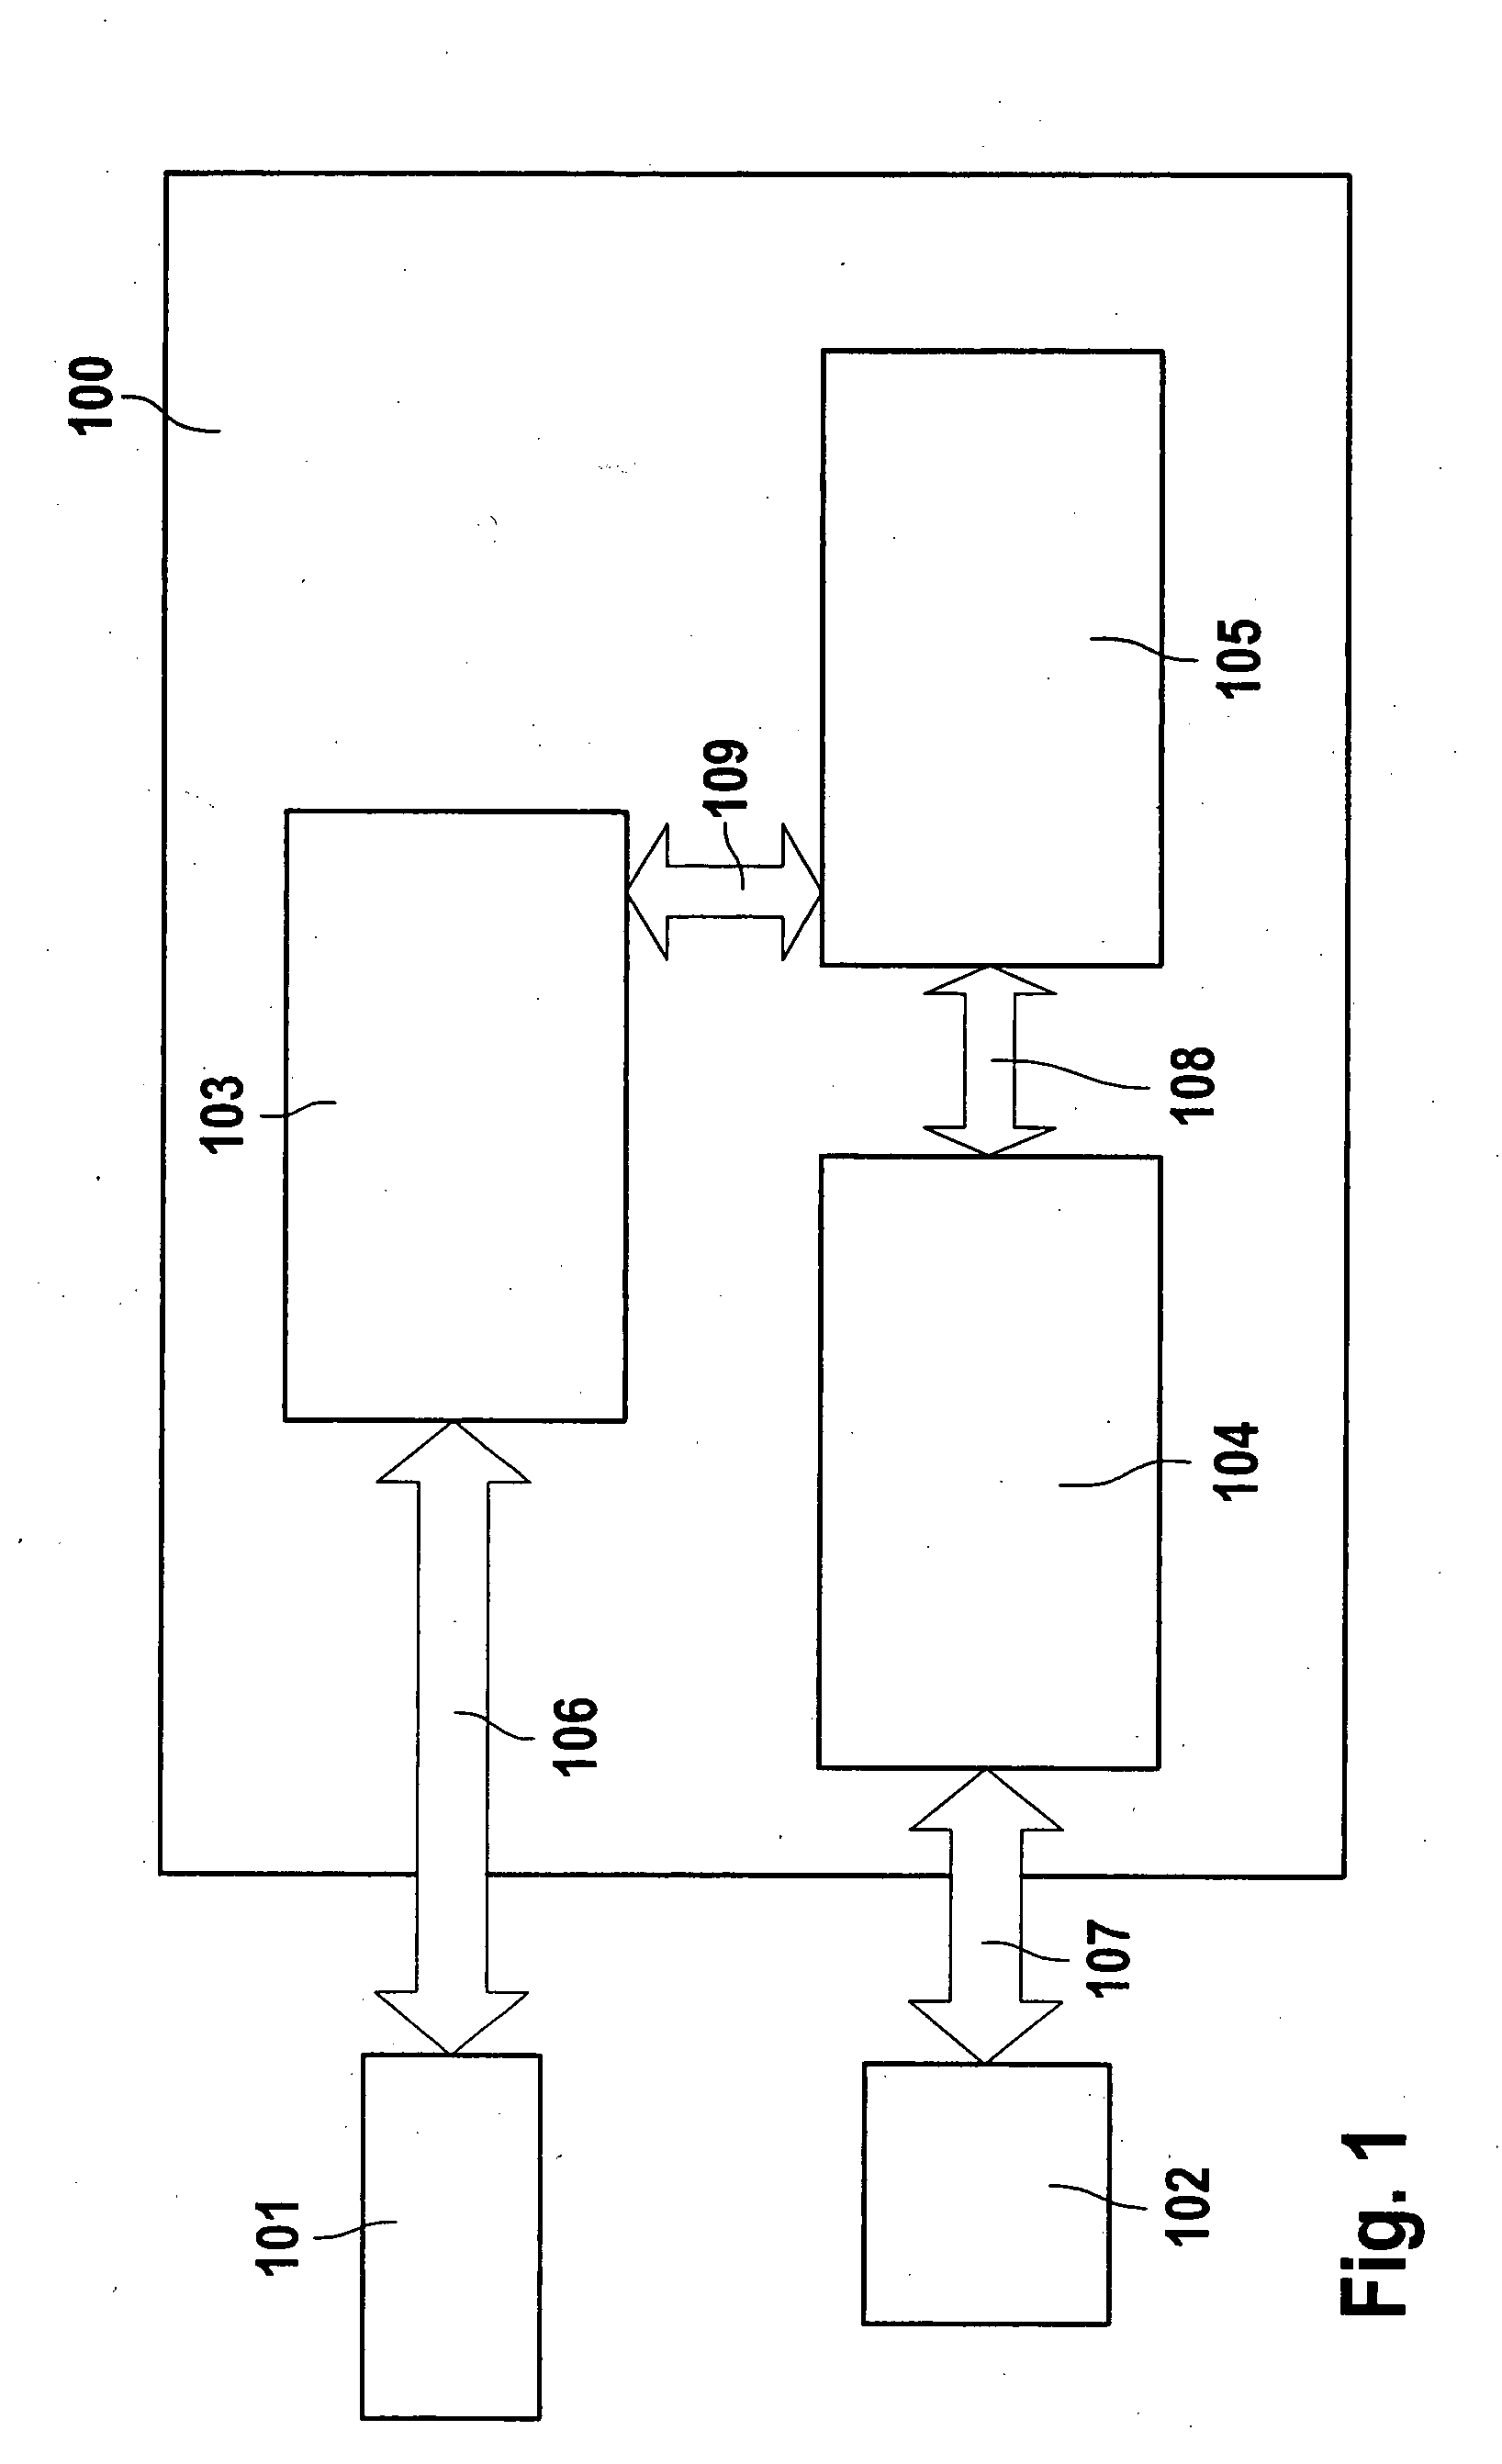 Method and Apparatus for Accessing Data of a Message Memory of a Communication Module